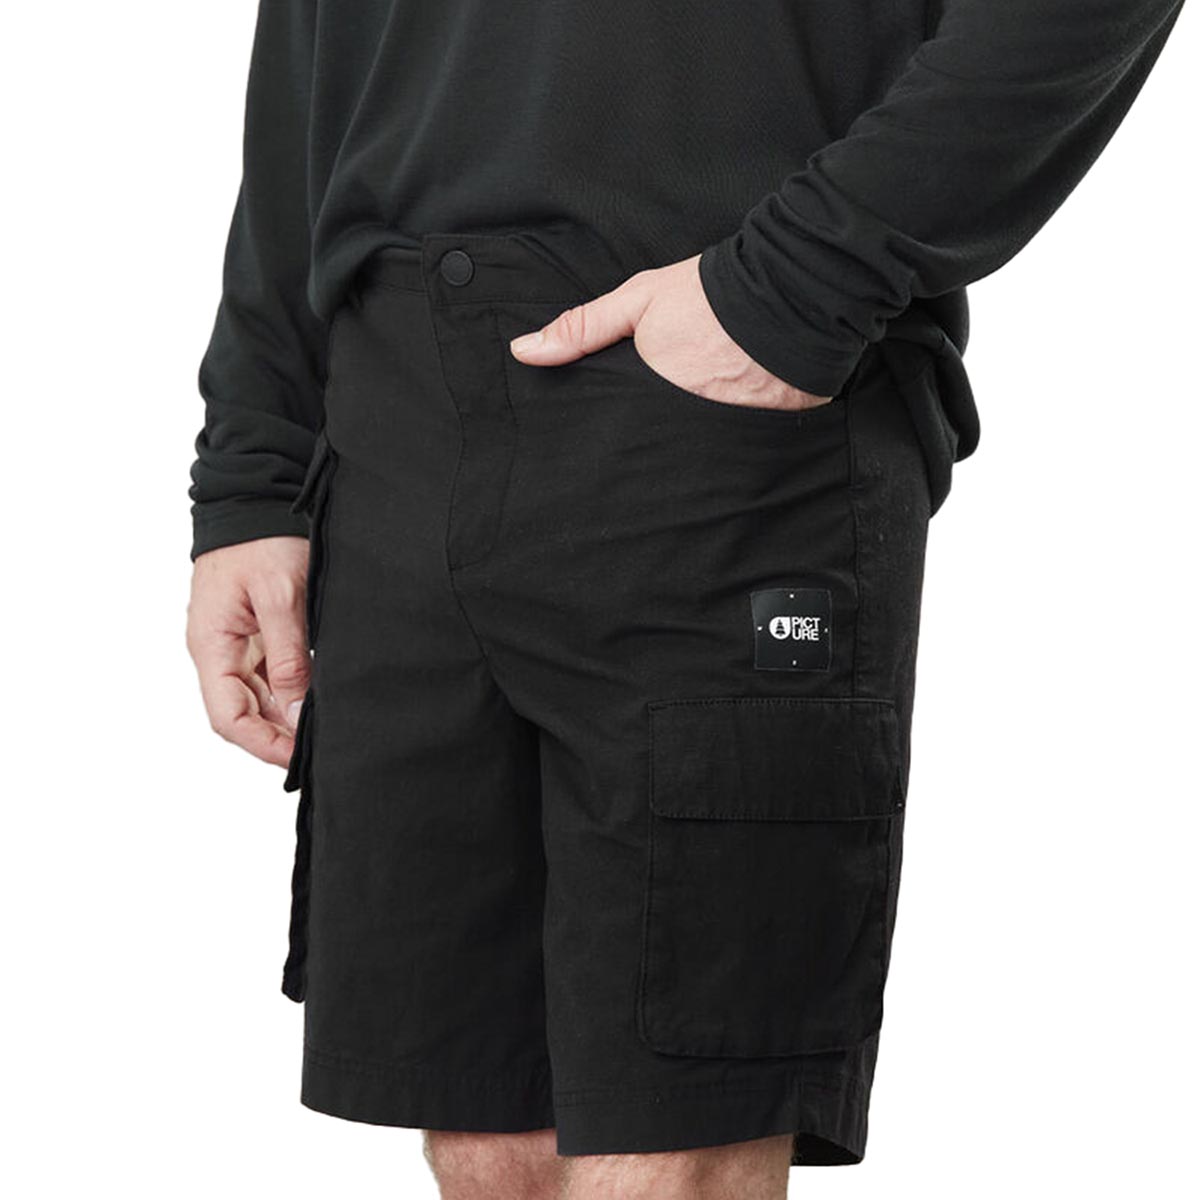 PICTURE - ROBUST SHORTS 19''